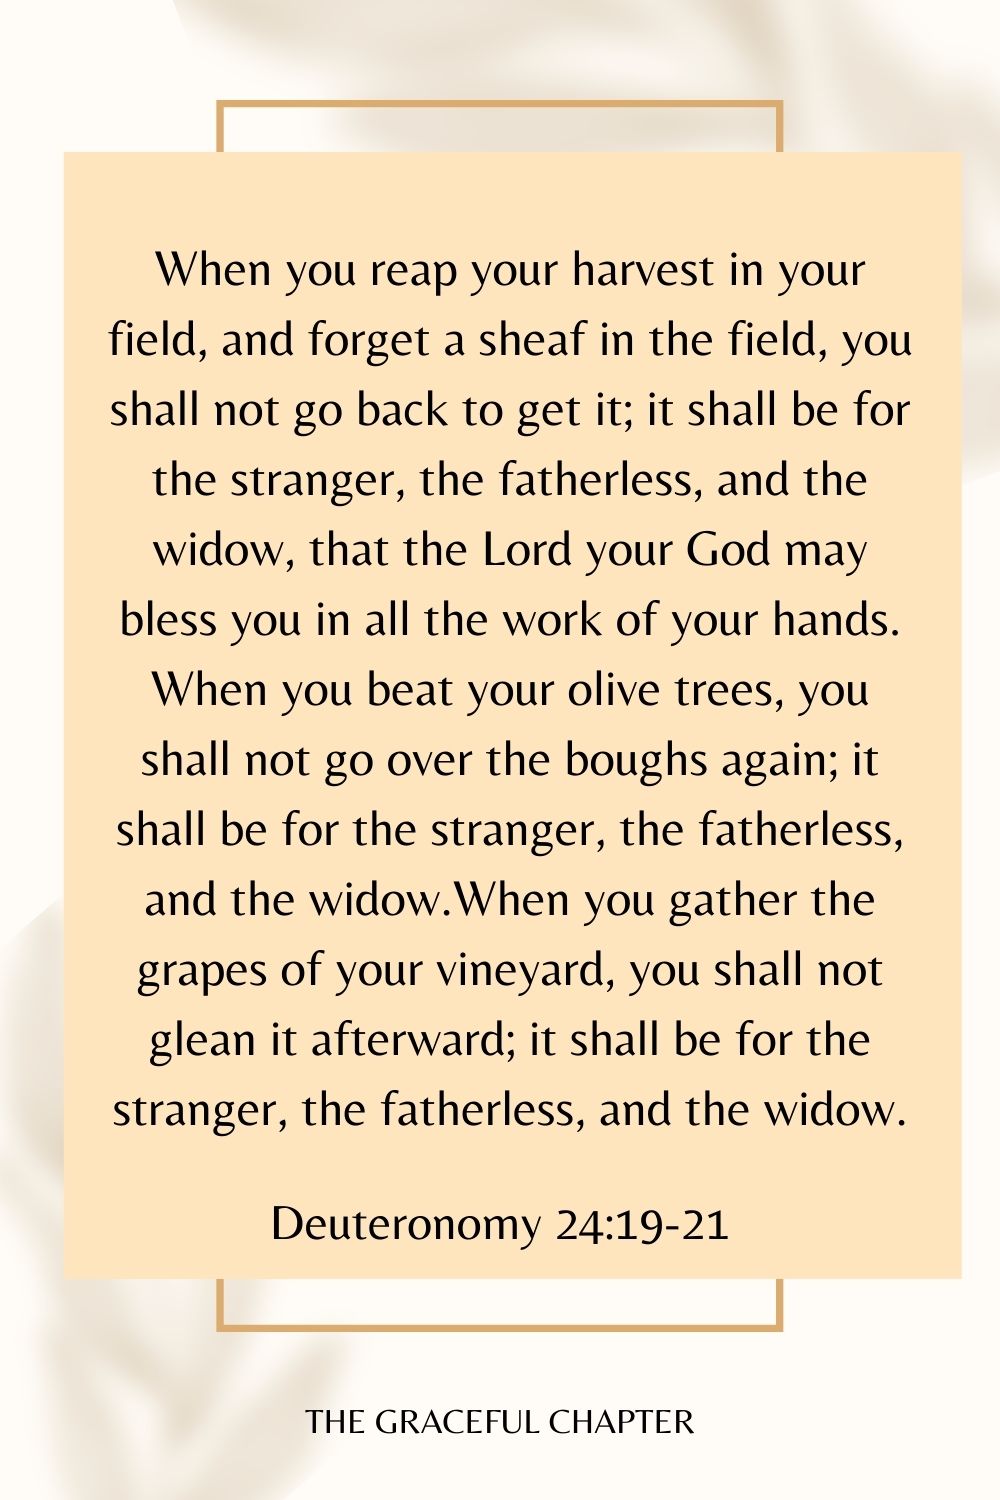 When you reap your harvest in your field, and forget a sheaf in the field, you shall not go back to get it; it shall be for the stranger, the fatherless, and the widow, that the Lord your God may bless you in all the work of your hands. When you beat your olive trees, you shall not go over the boughs again; it shall be for the stranger, the fatherless, and the widow.When you gather the grapes of your vineyard, you shall not glean it afterward; it shall be for the stranger, the fatherless, and the widow. Deuteronomy 24:19-21